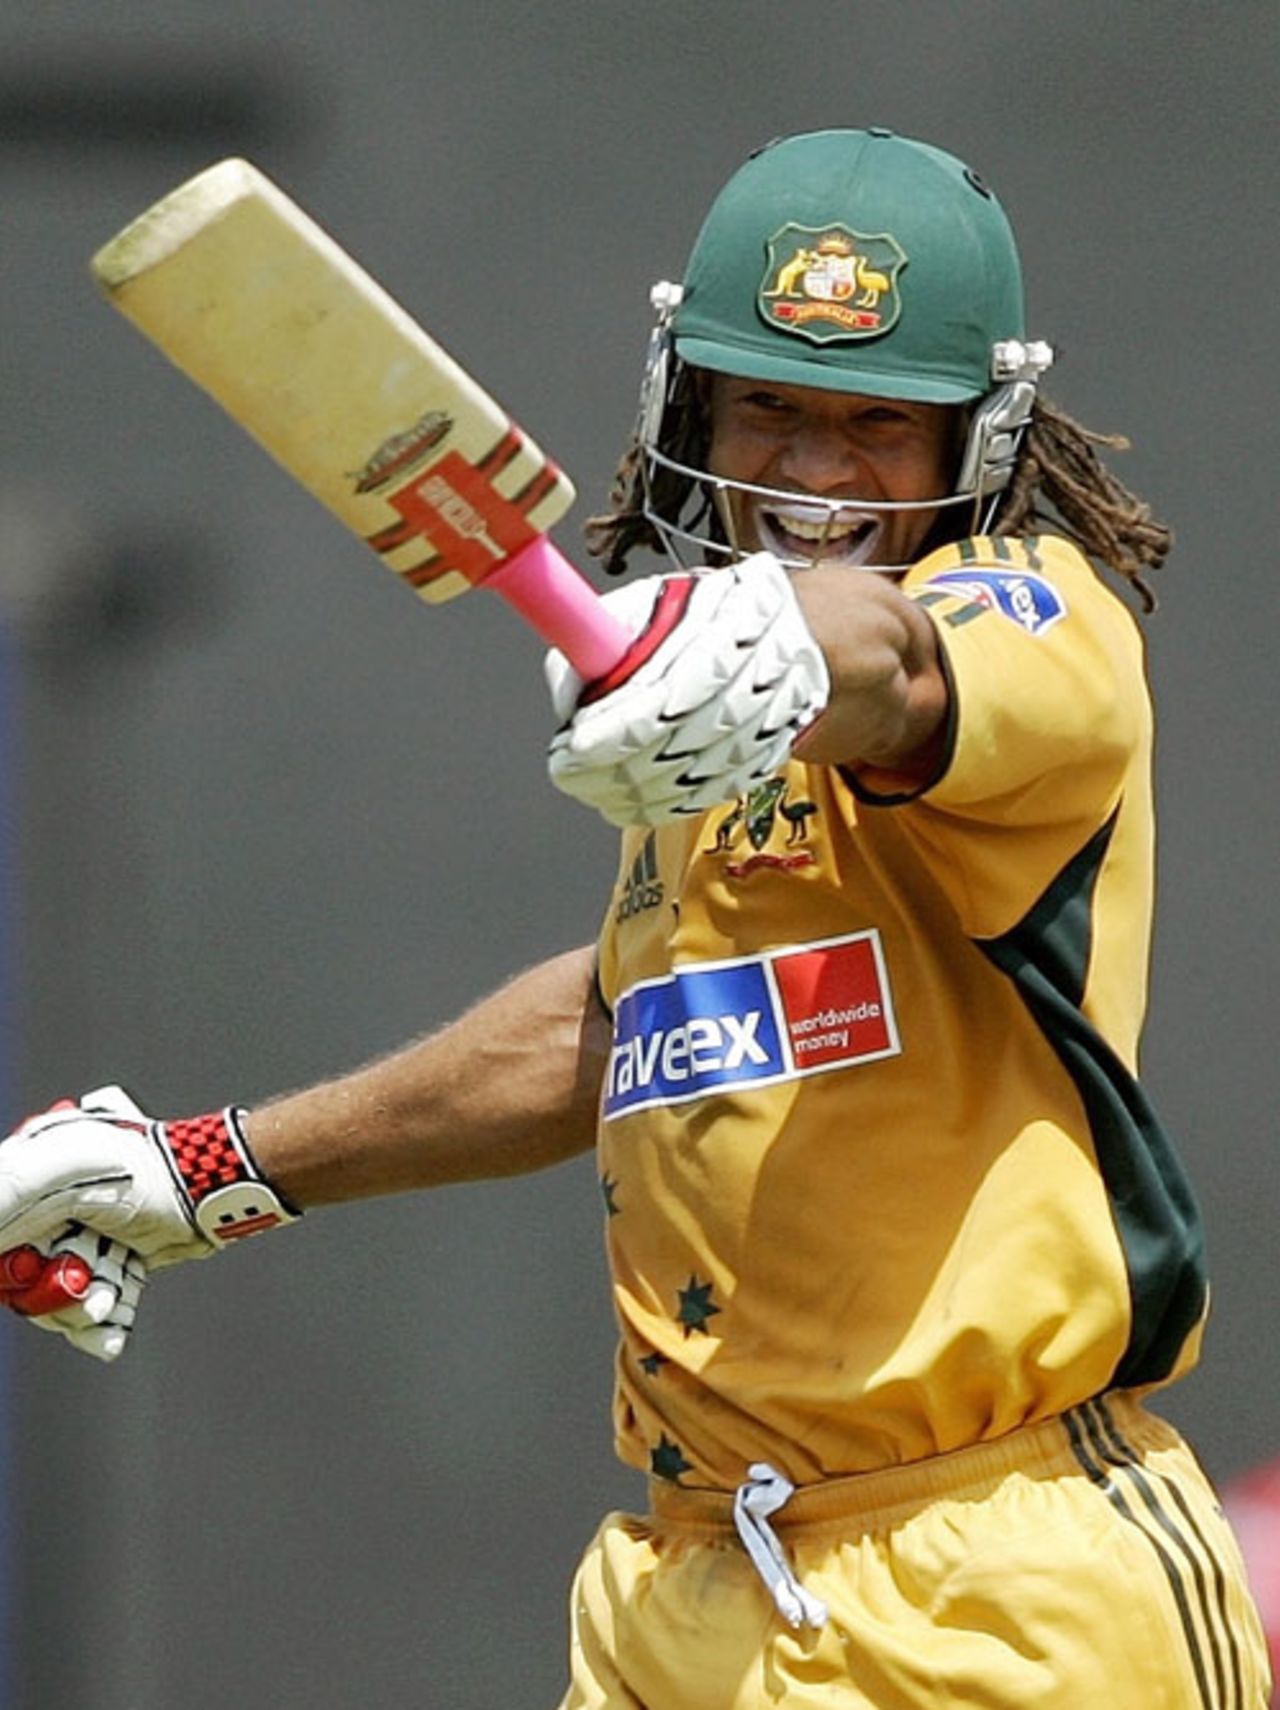 Andrew Symonds signals to his team-mates after reaching his century, India v Australia, 6th ODI, Nagpur, October 14, 2007   



